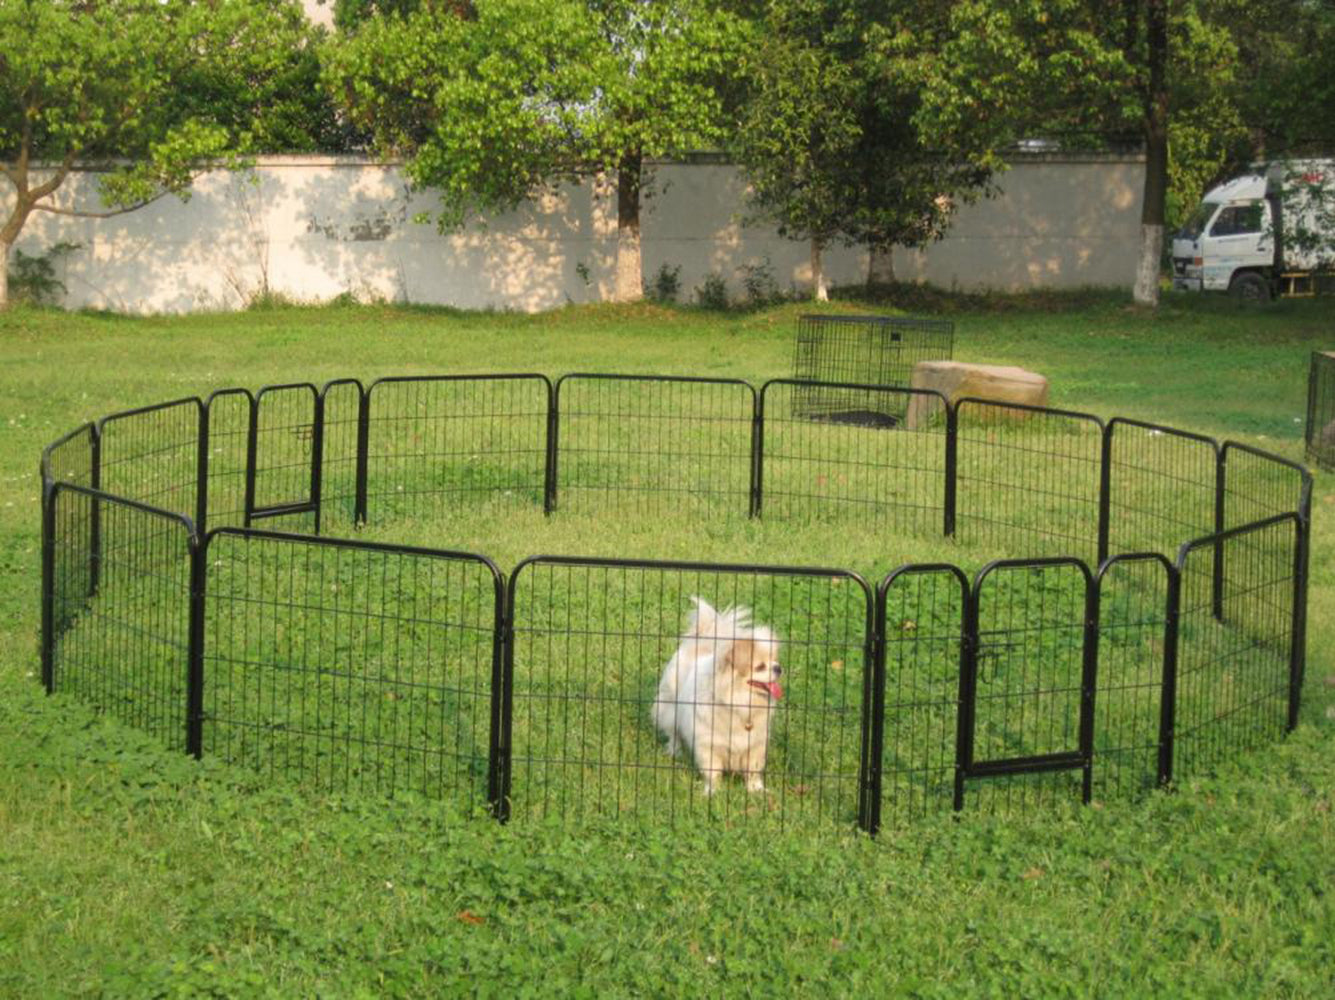 Dog Playpen 8 Panel Foldable Dog Pen Indoor/Outdoor Puppy Pen Pet Playpen for Large Dogs Heavy Duty Metal Exercise Fence for Small Animals with Door for Garden Play Yard 23.6